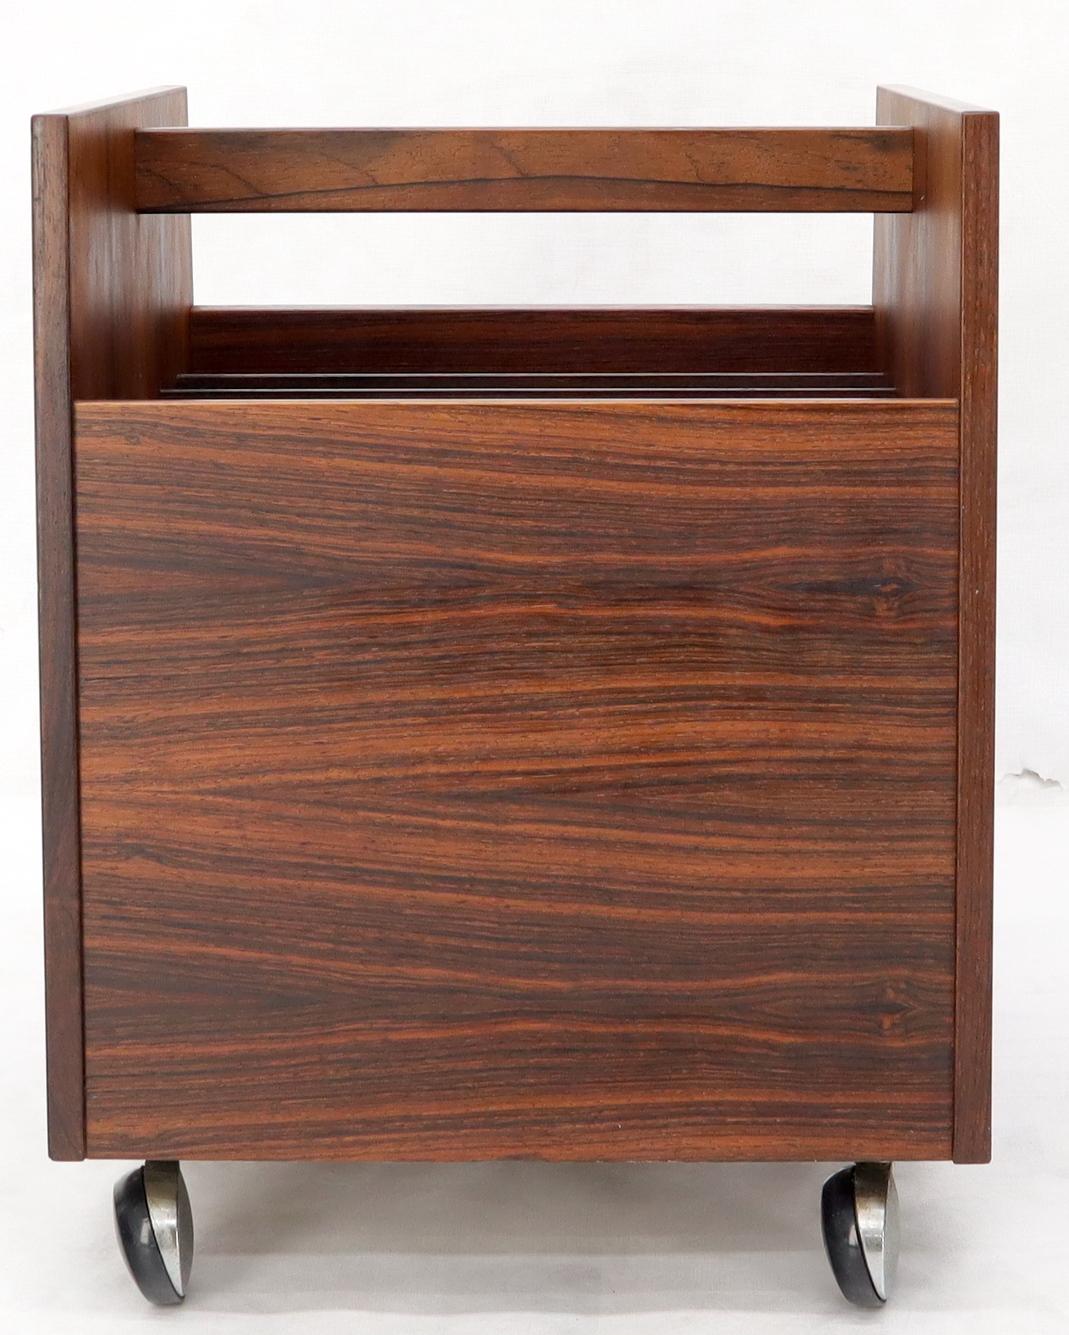 Lacquered Danish Mid-Century Modern Rosewood Magazine Rack on Wheels For Sale